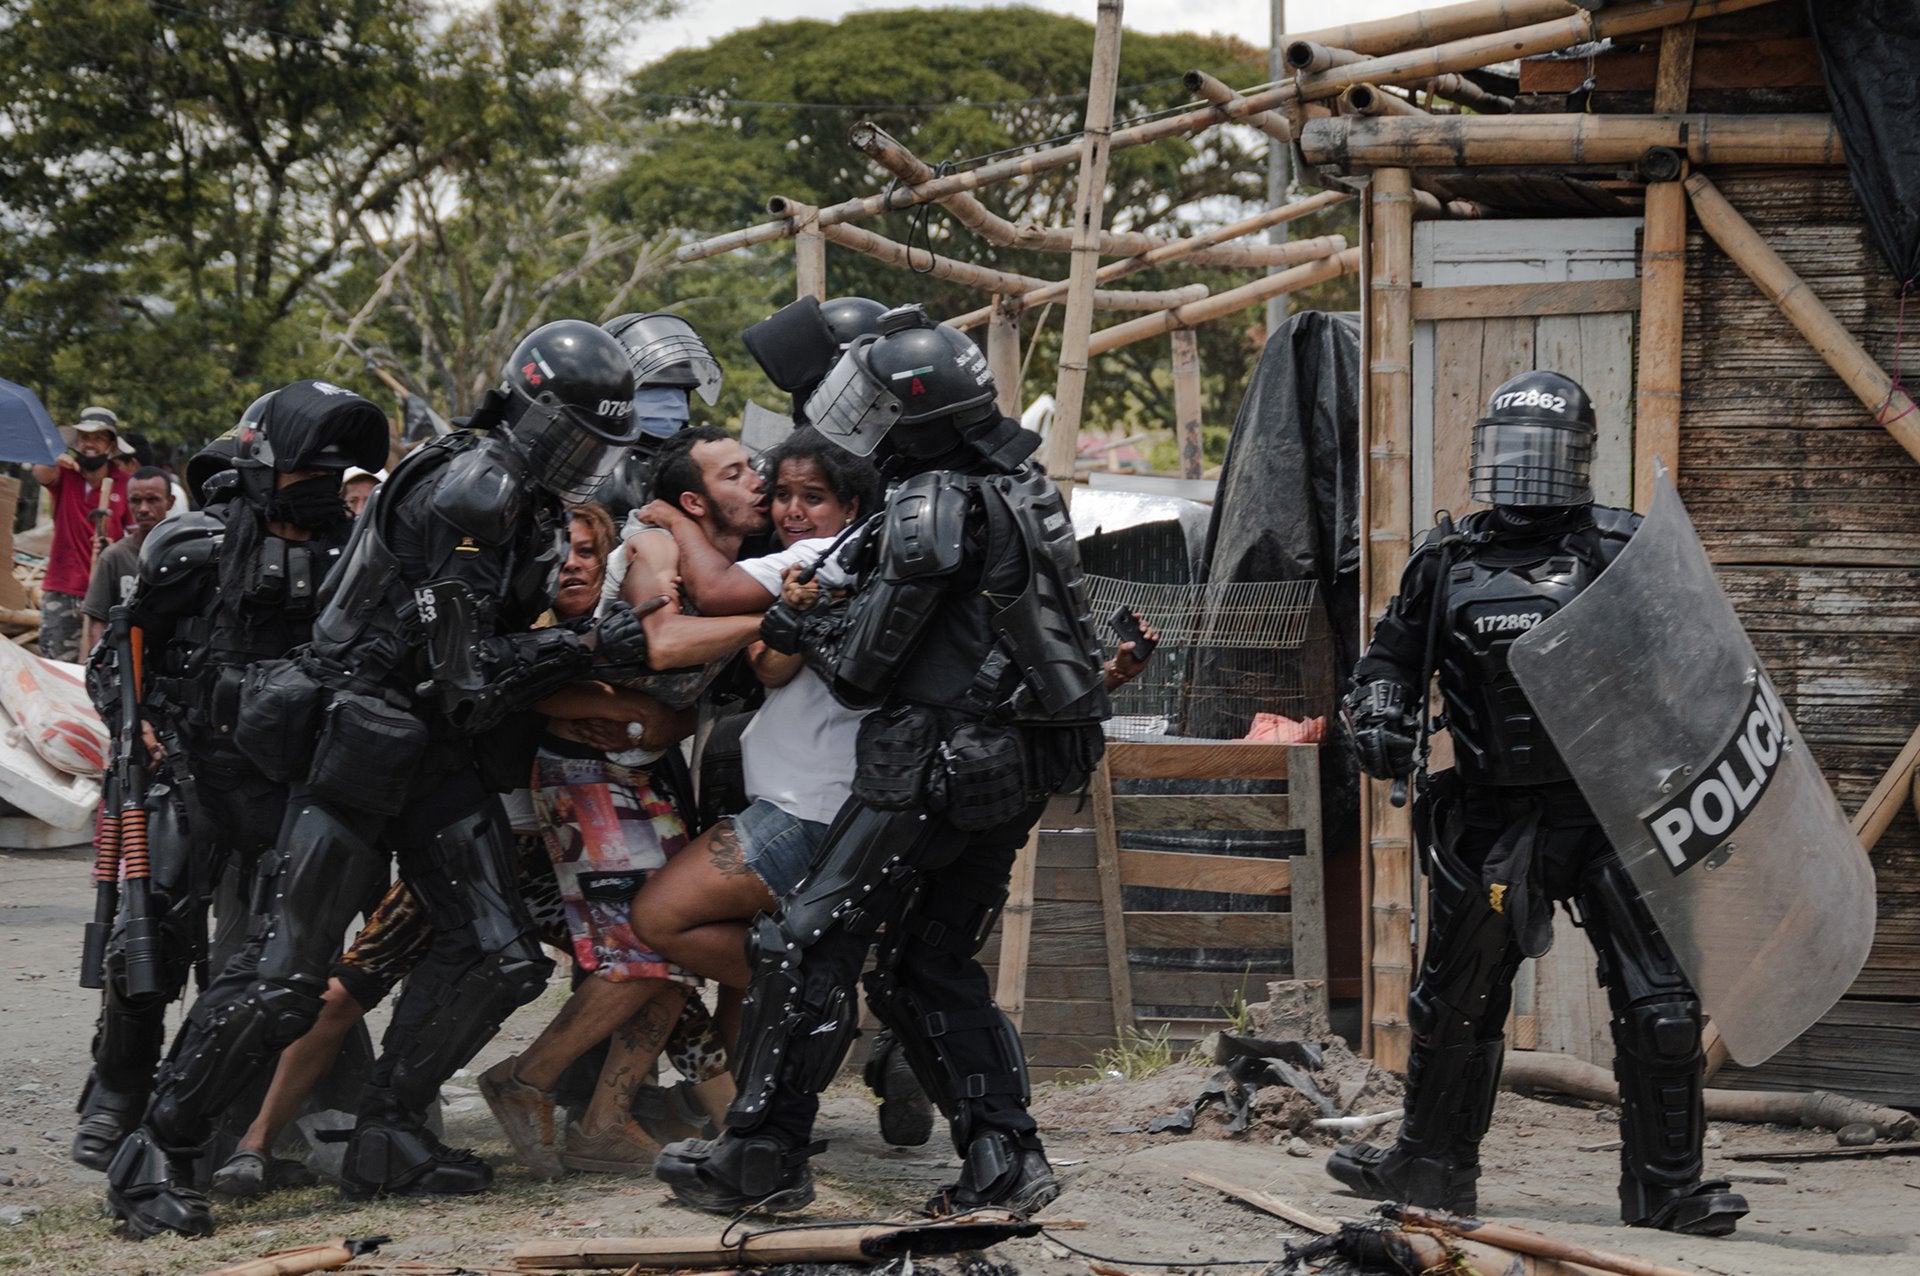 Colombian photographer Vladimir Encina won the Singles category for his photo showing police arresting a man during evictions to clear the way for a ârailroad megaprojectâ in Puerto Caldas, Colombia.